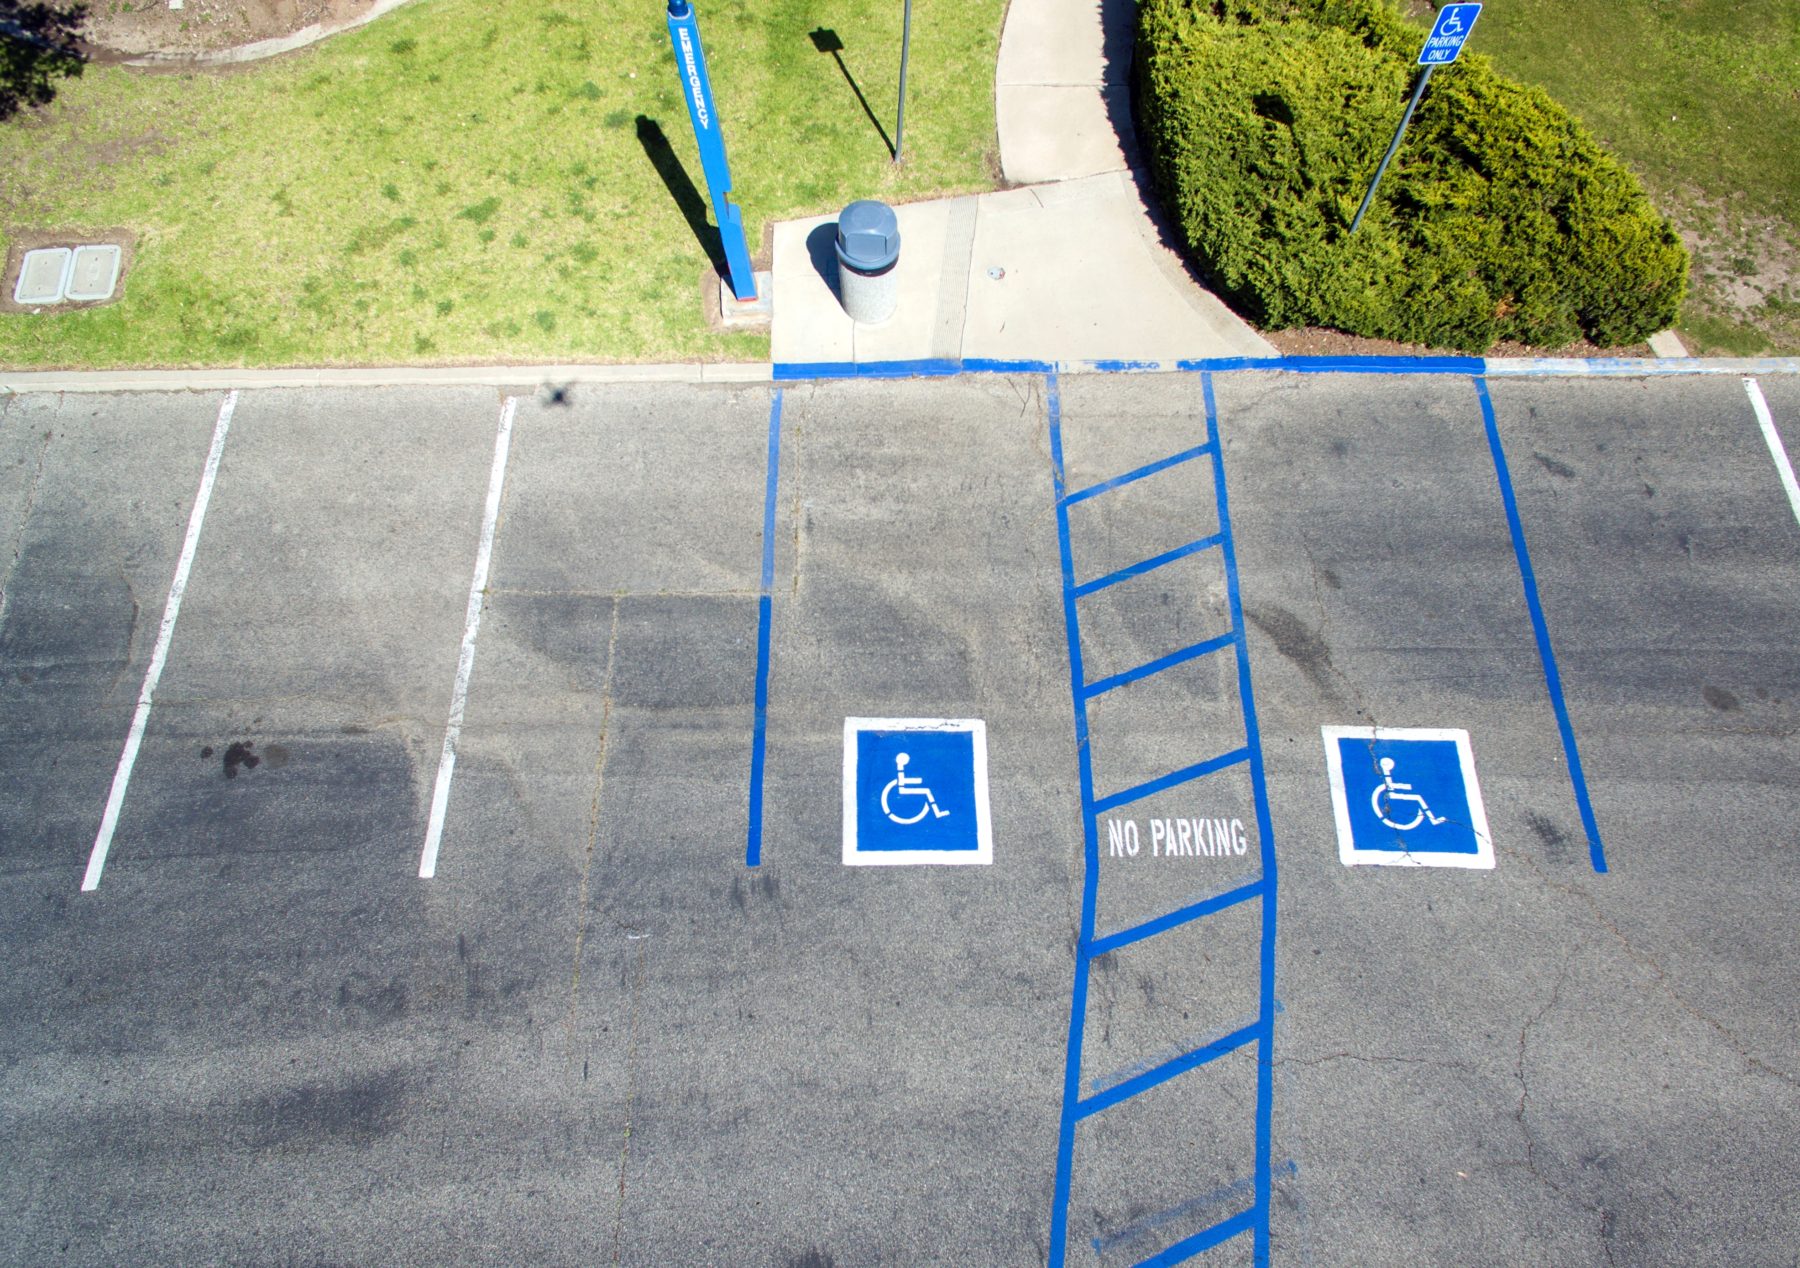 A car park with the disabled parking spots clearly outlined in blue paint.